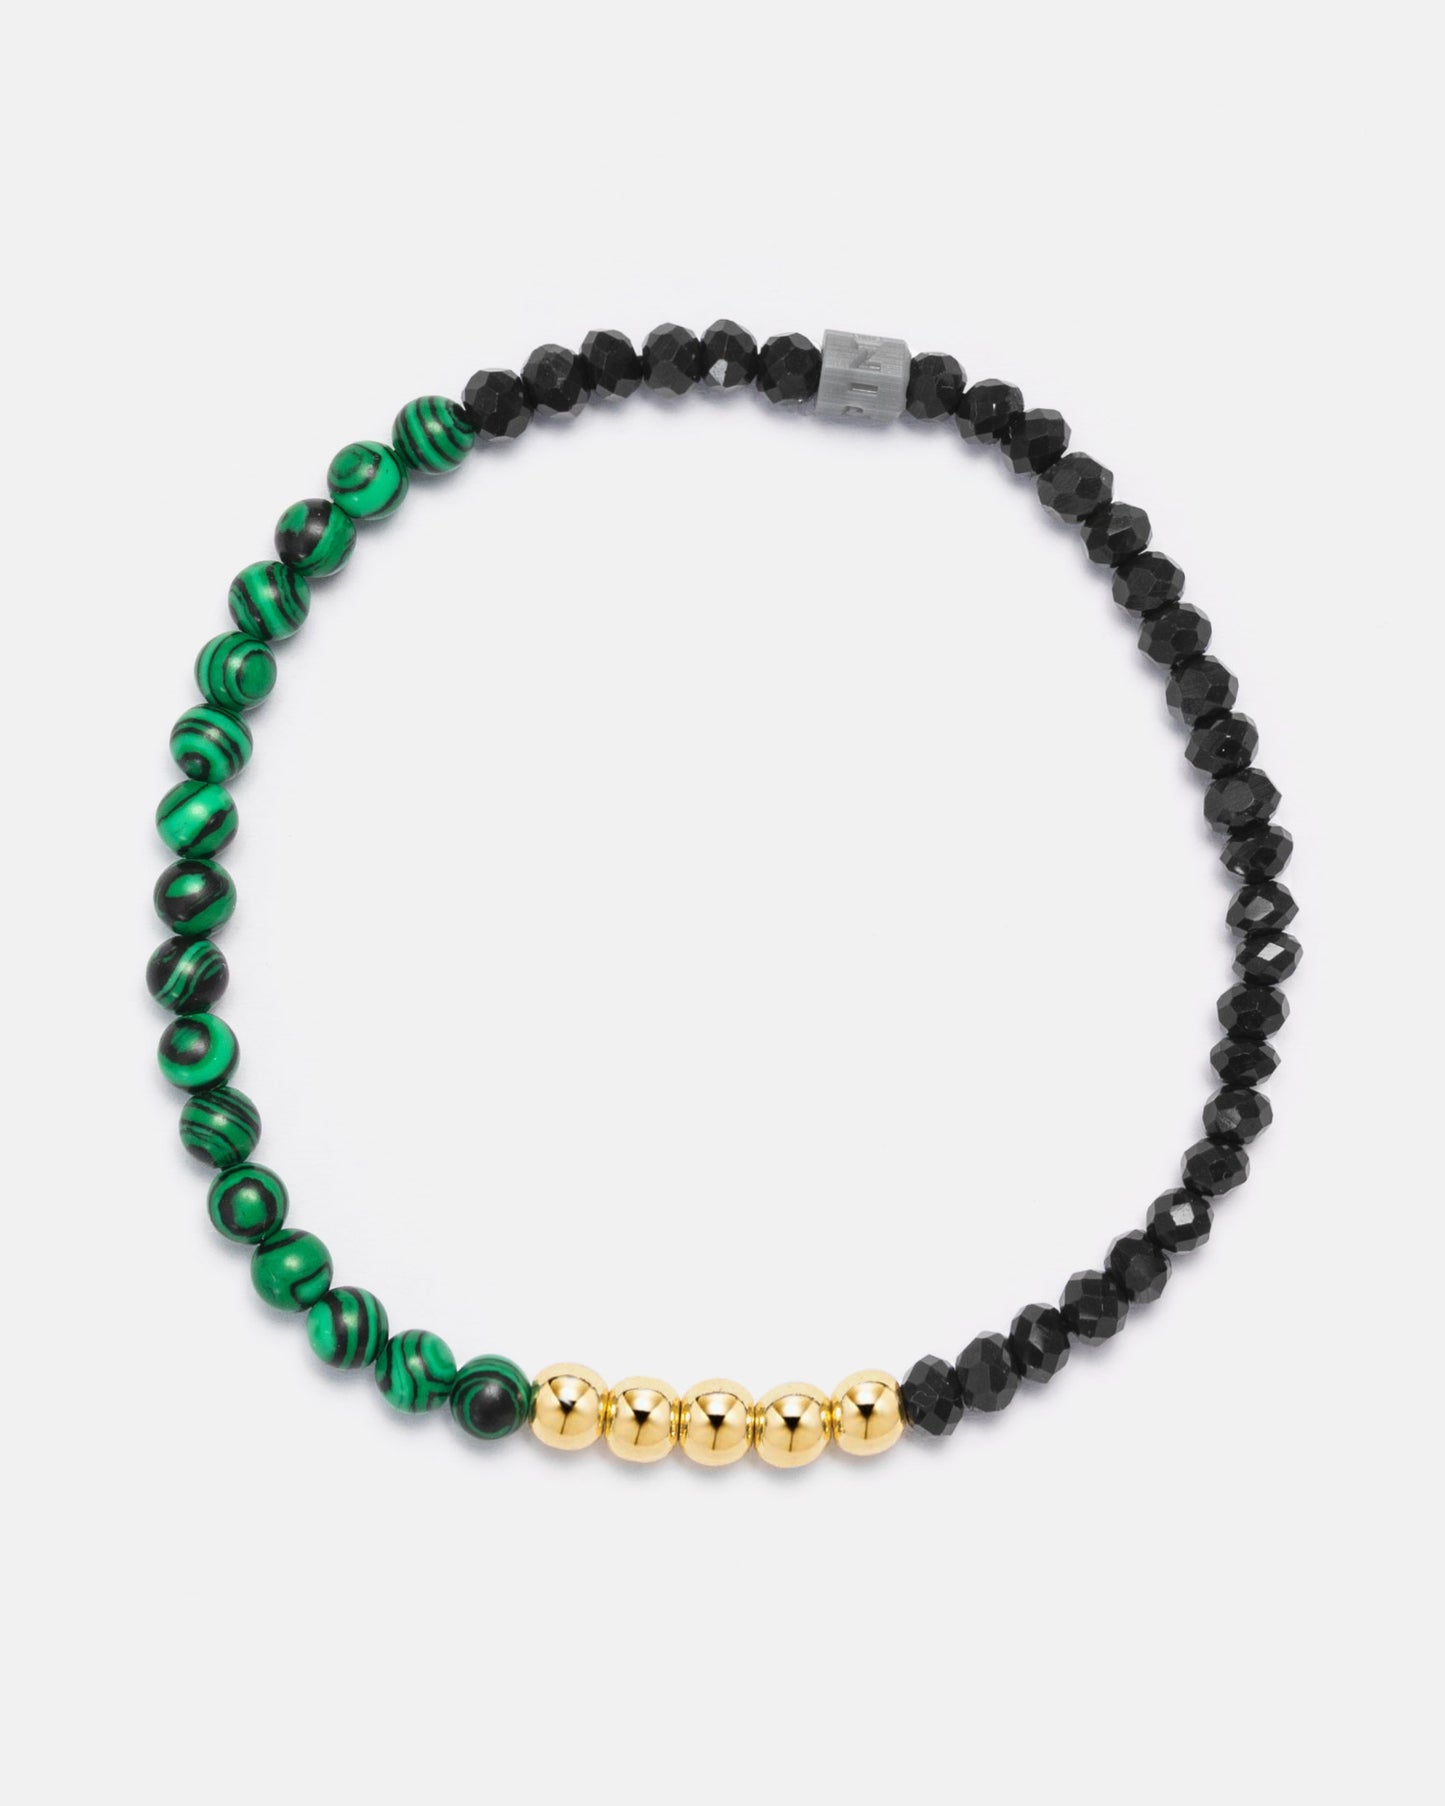 Beaded Bracelet with Green Marble Beads, Black Seed Beads and 18kt Gold Beads